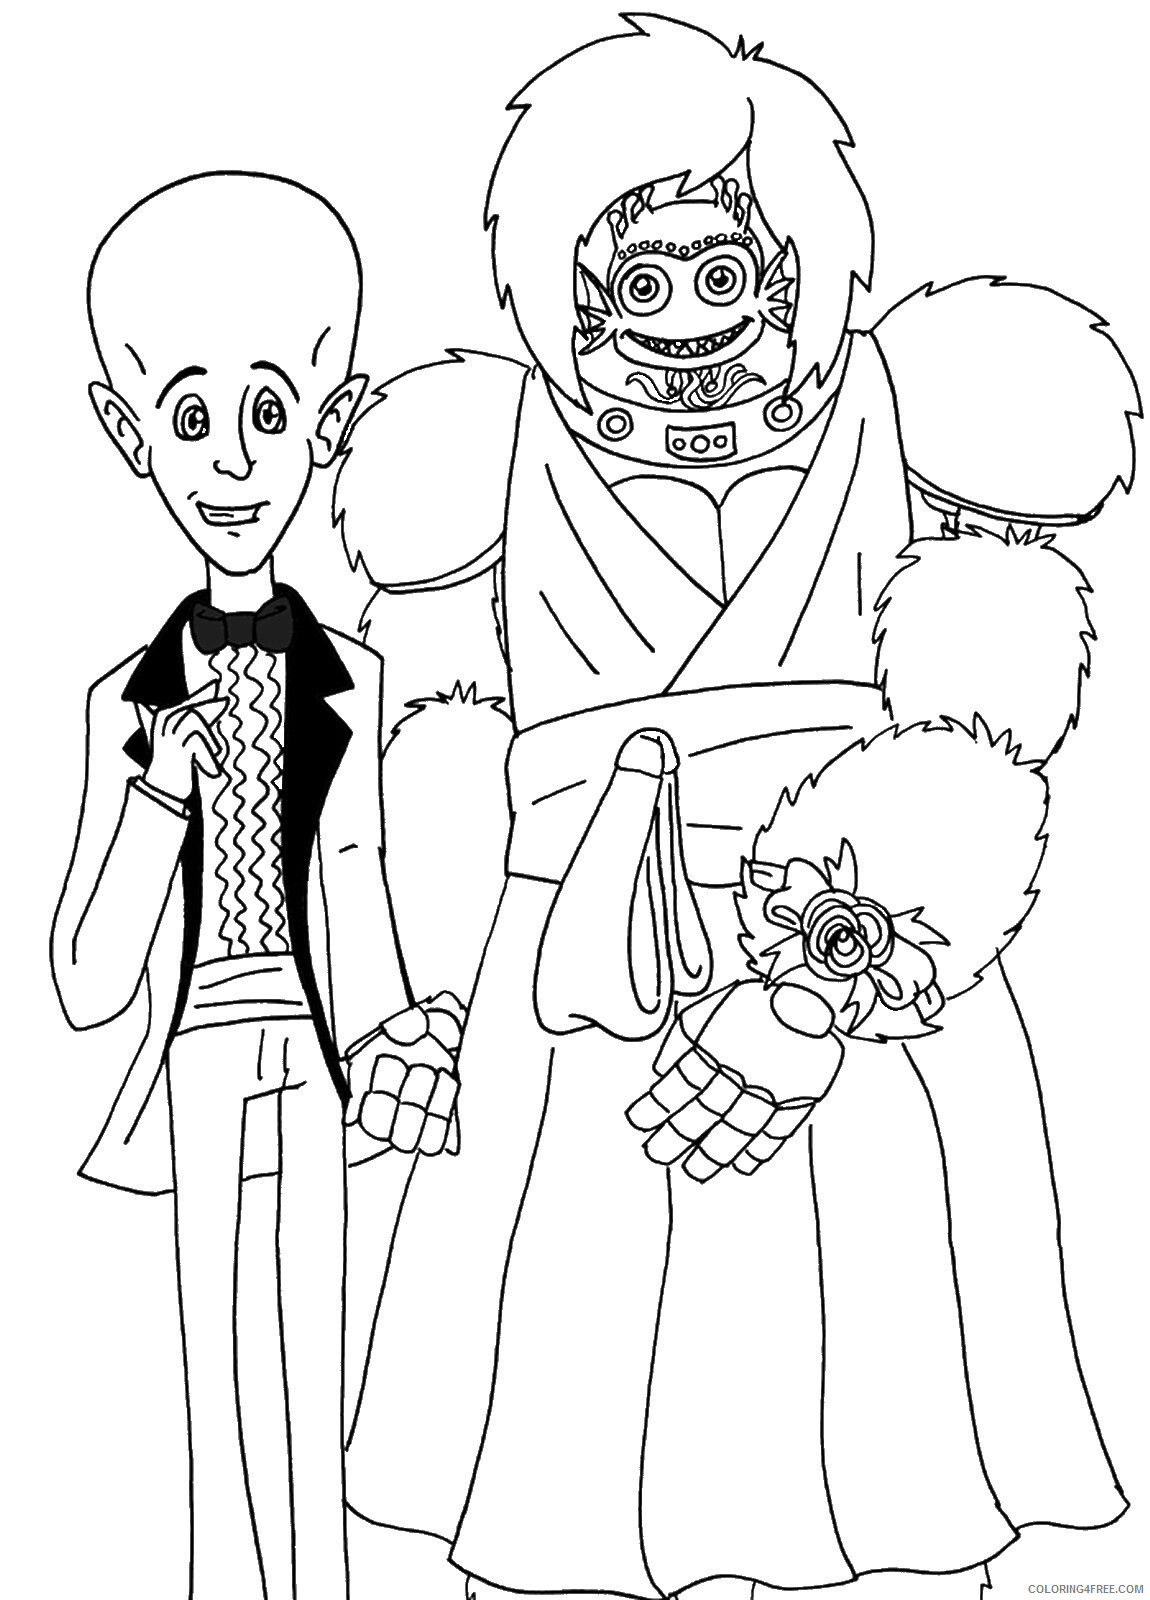 Megamind Coloring Pages TV Film megamind_cl_04 Printable 2020 05070 Coloring4free